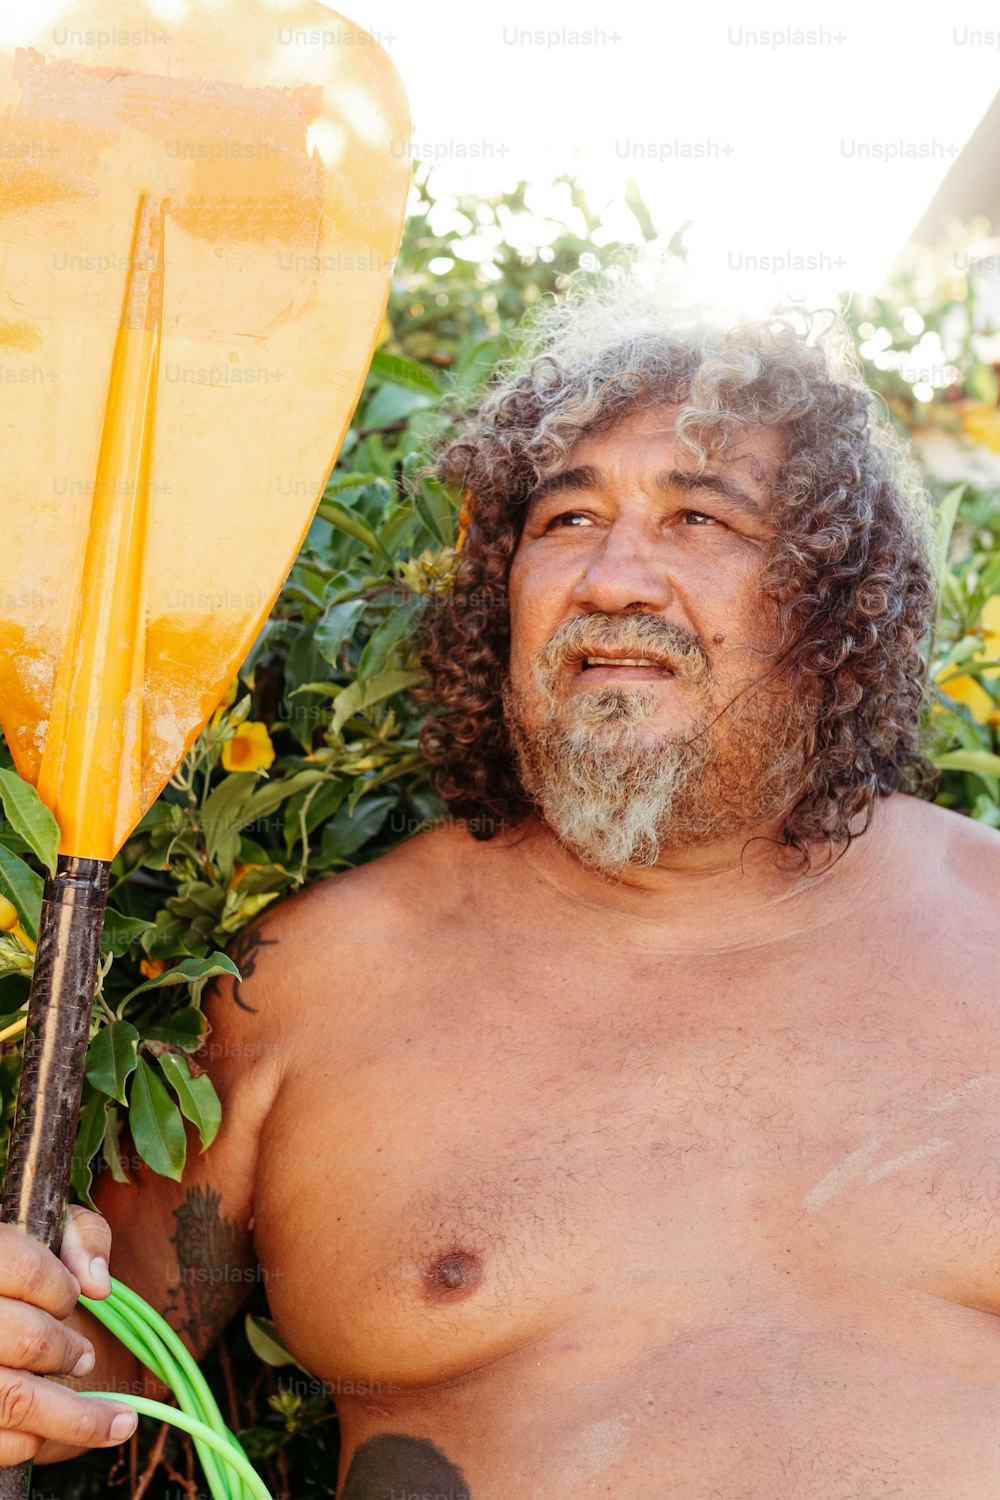 a shirtless man holding a large yellow paddle